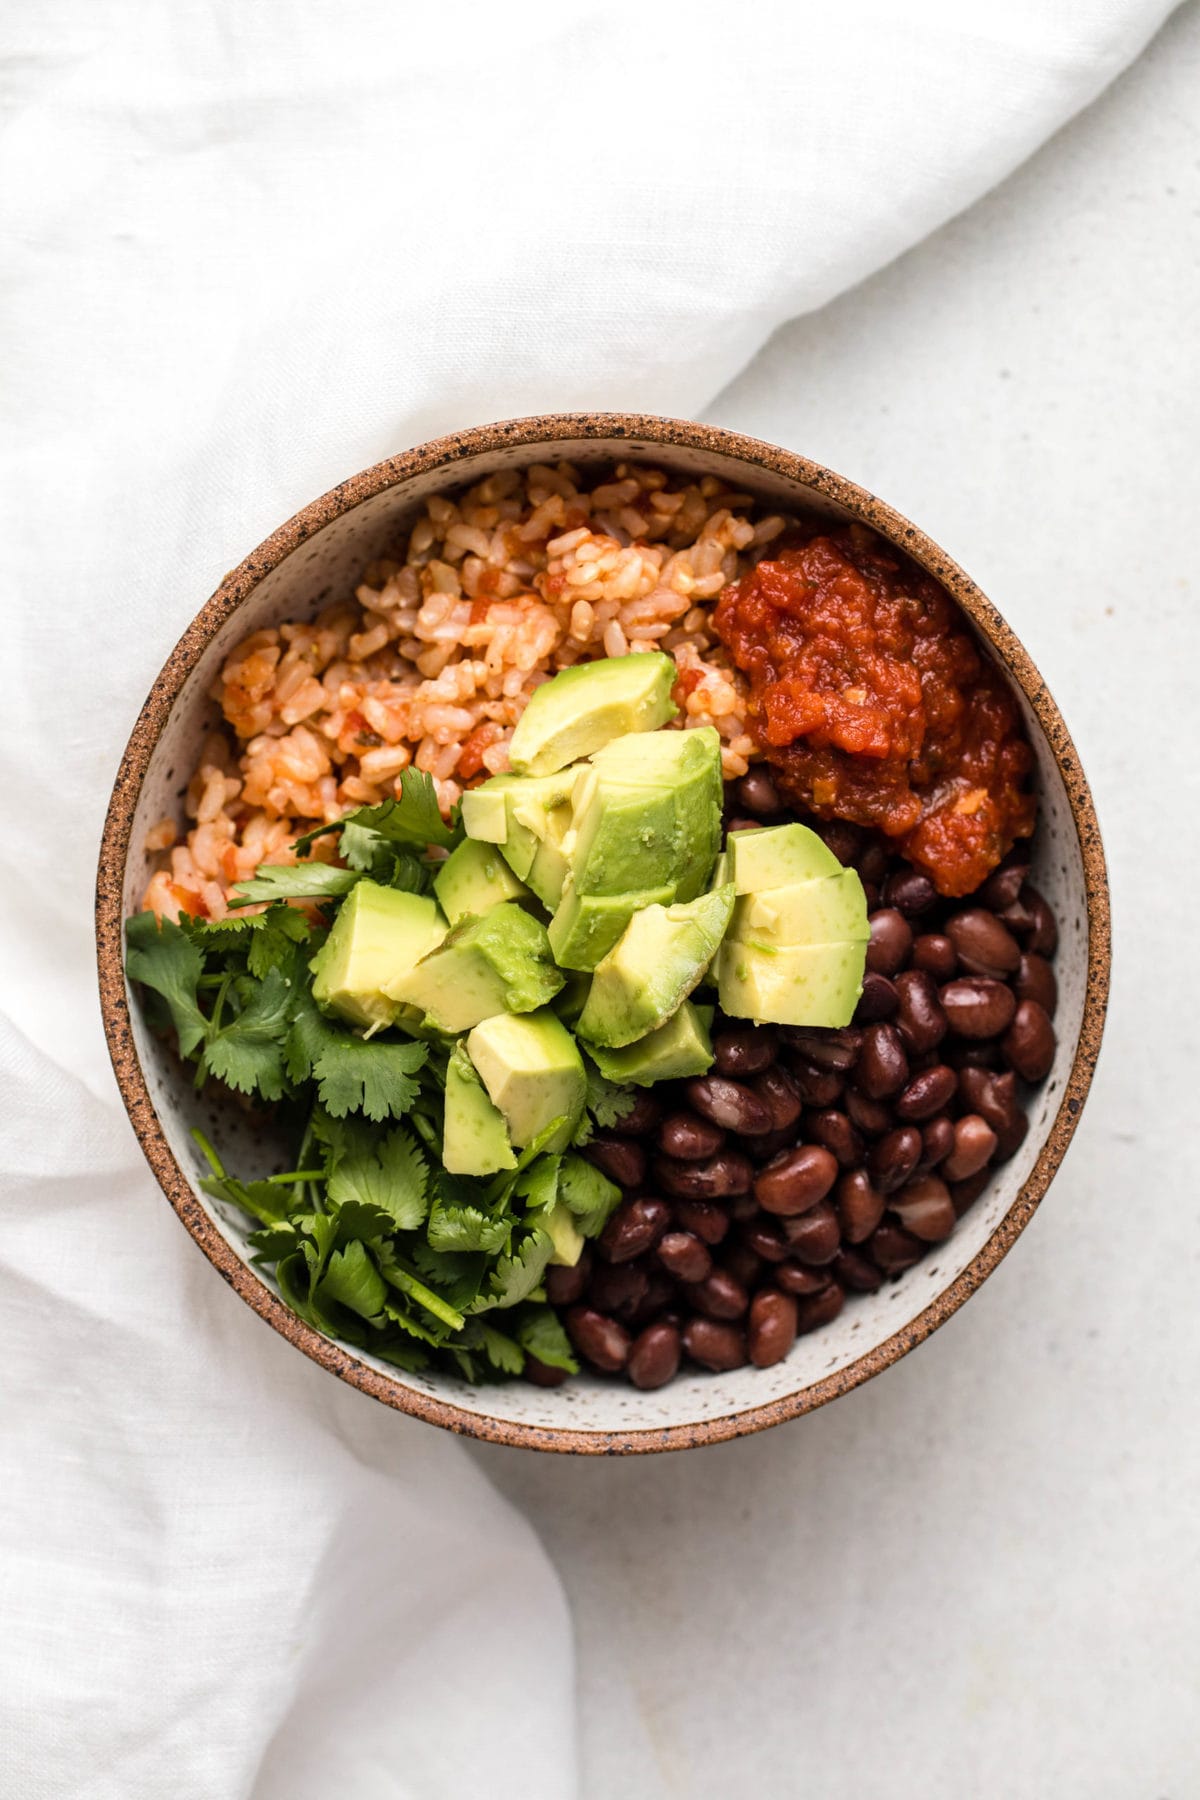 Vegan Burrito Bowl with black beans, salsa, rice, cilantro, and avocado in small speckled bowl on white background